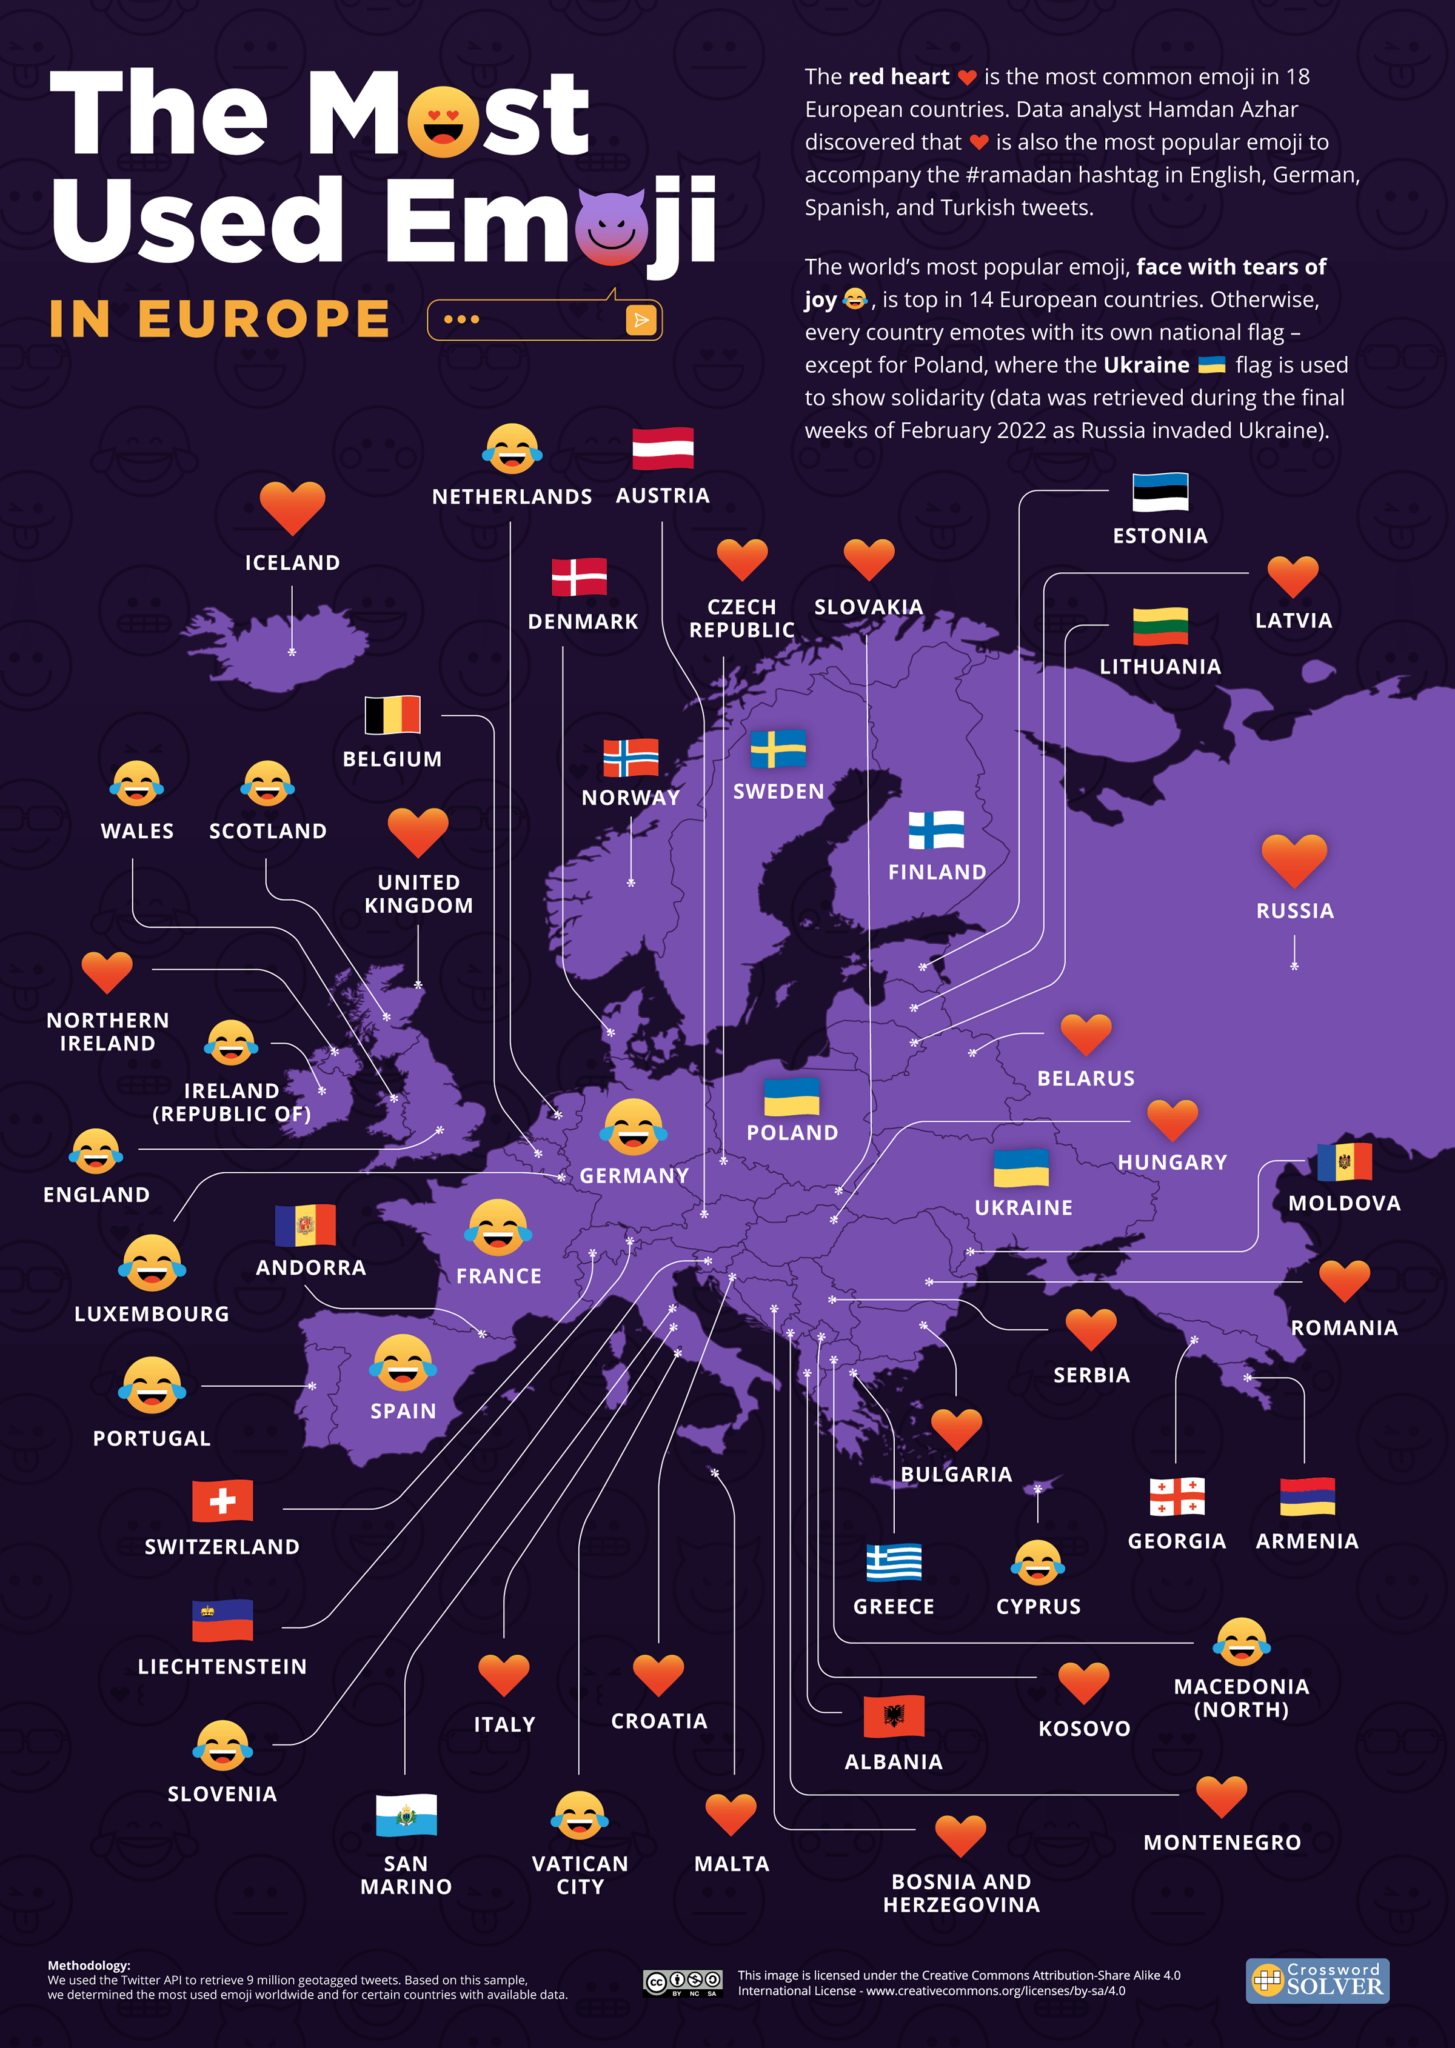 The Most Used Emoji on Twitter in Every Country